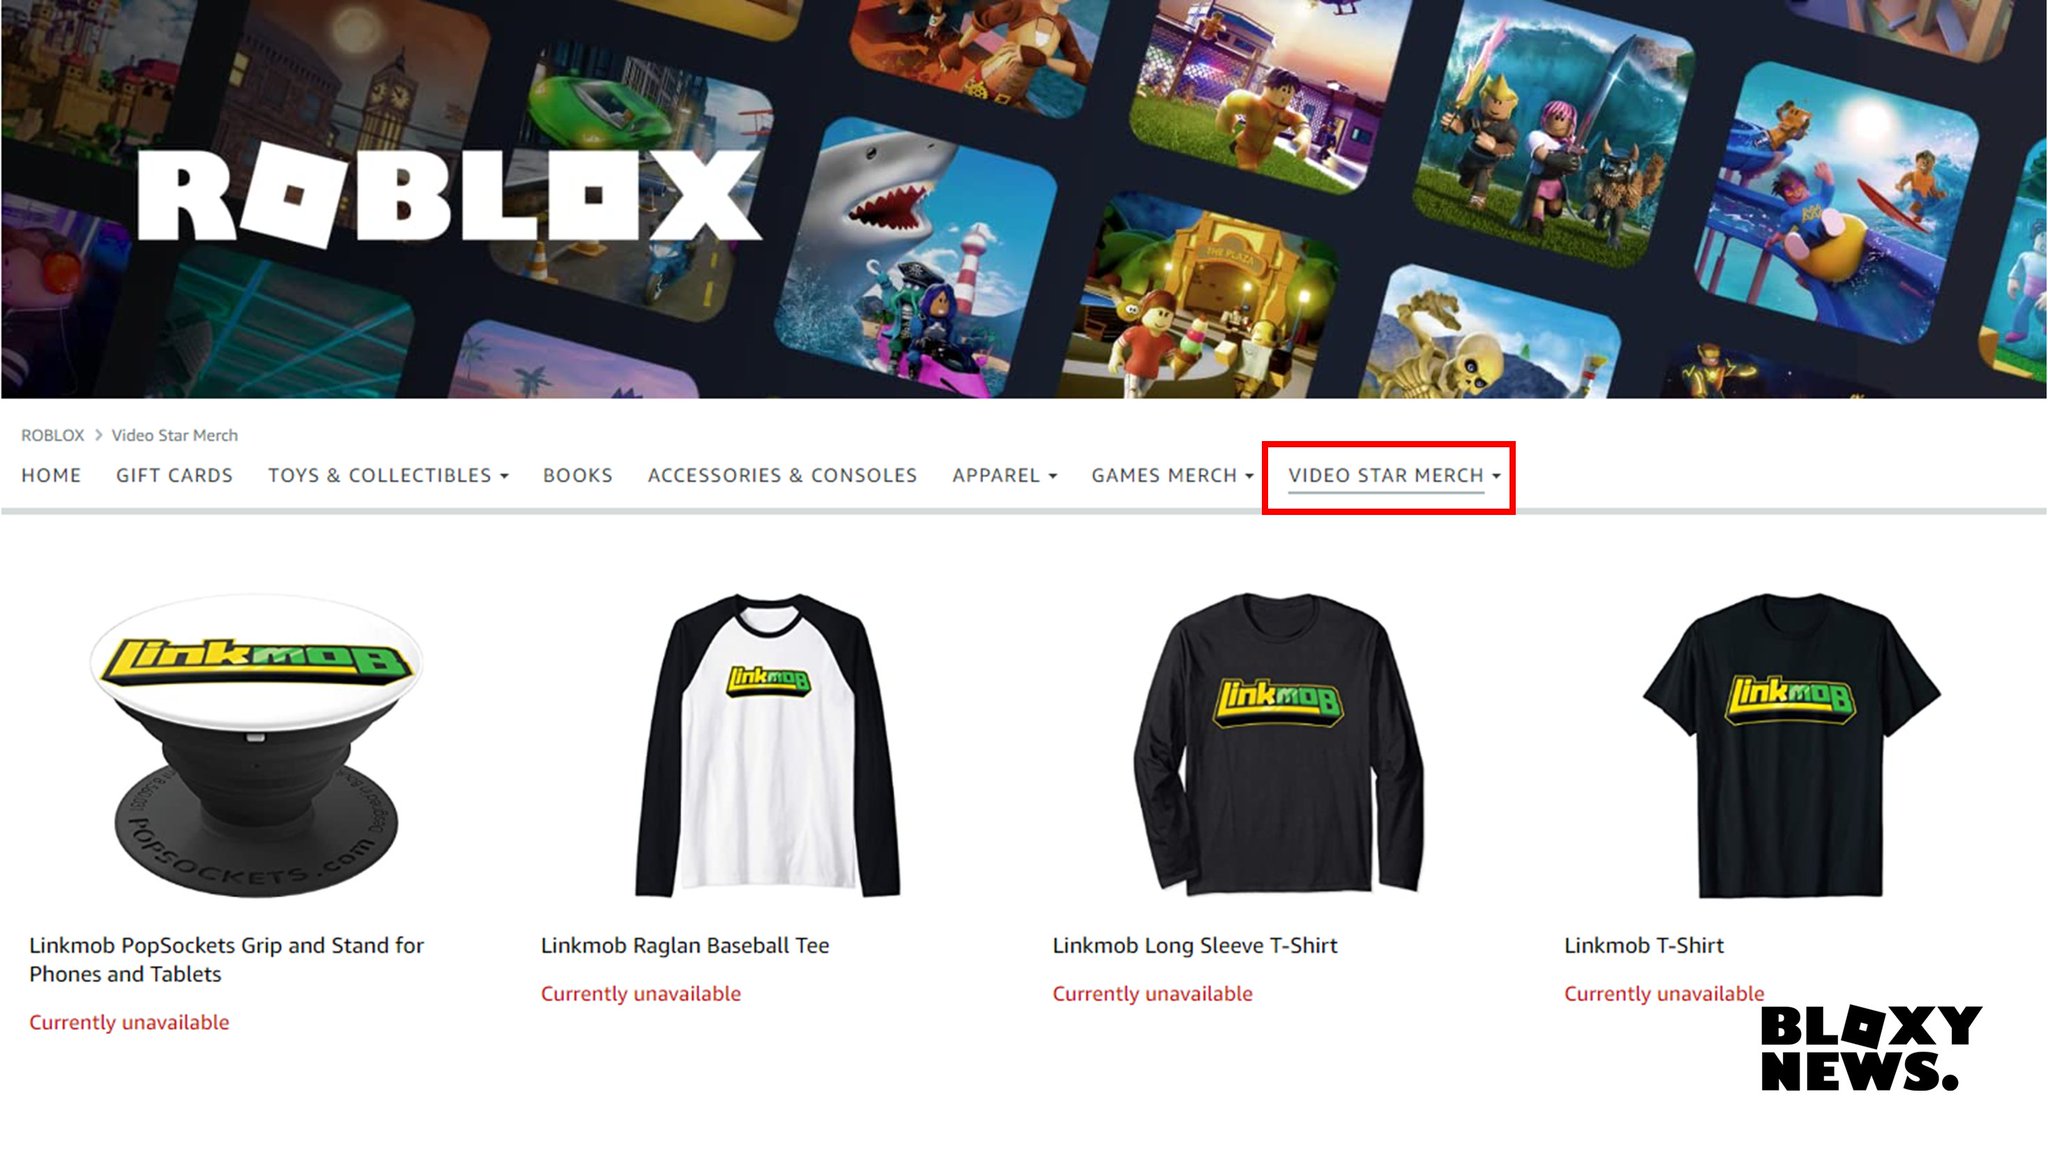 Bloxy News On Twitter Video Star Creators Are Now Starting To Sell Their Own Merchandise On The Official Roblox Amazon Store Https T Co Djiu8kx0ch Https T Co Icij0tkvwi - roblox merchandise amazon